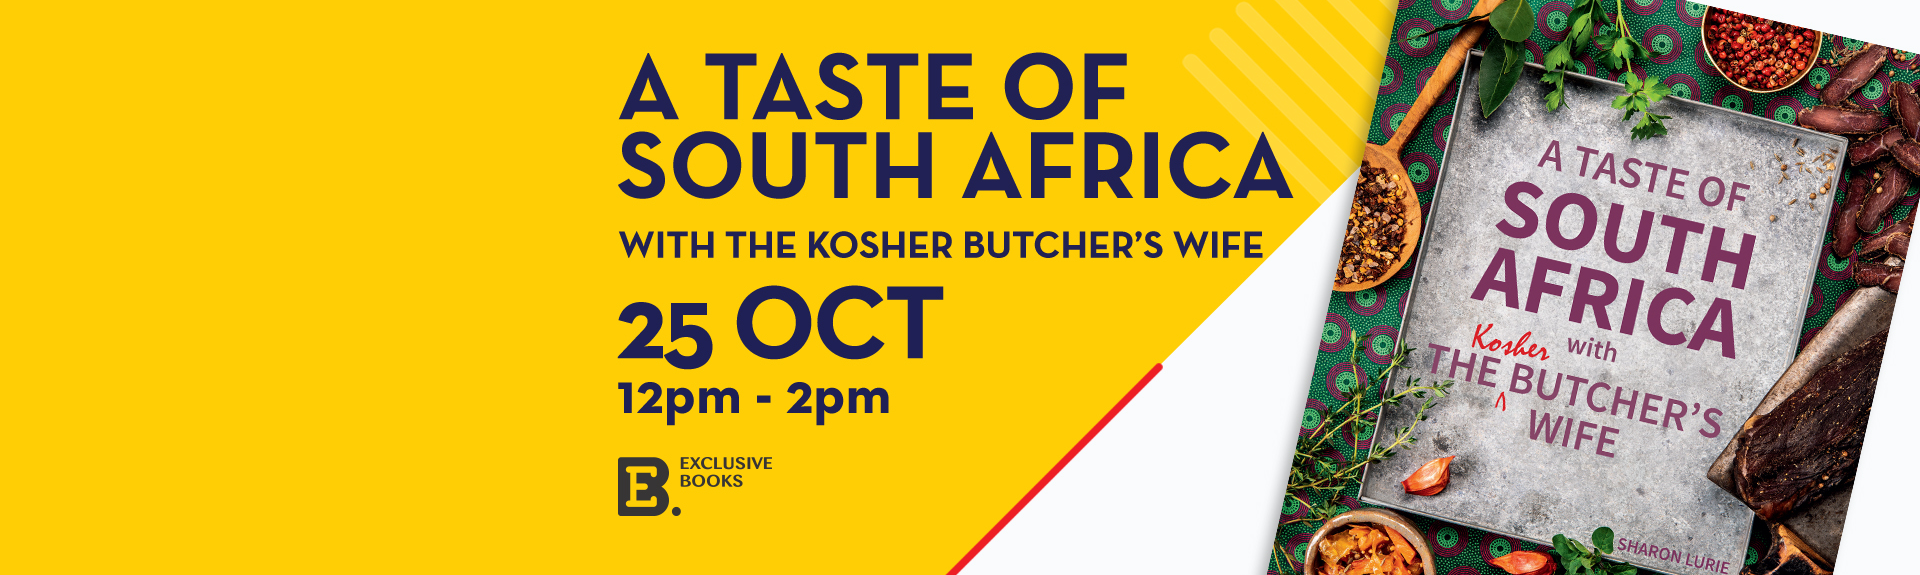 Join The Kosher Butcher's Wife at Killarney Mall Foodie Market